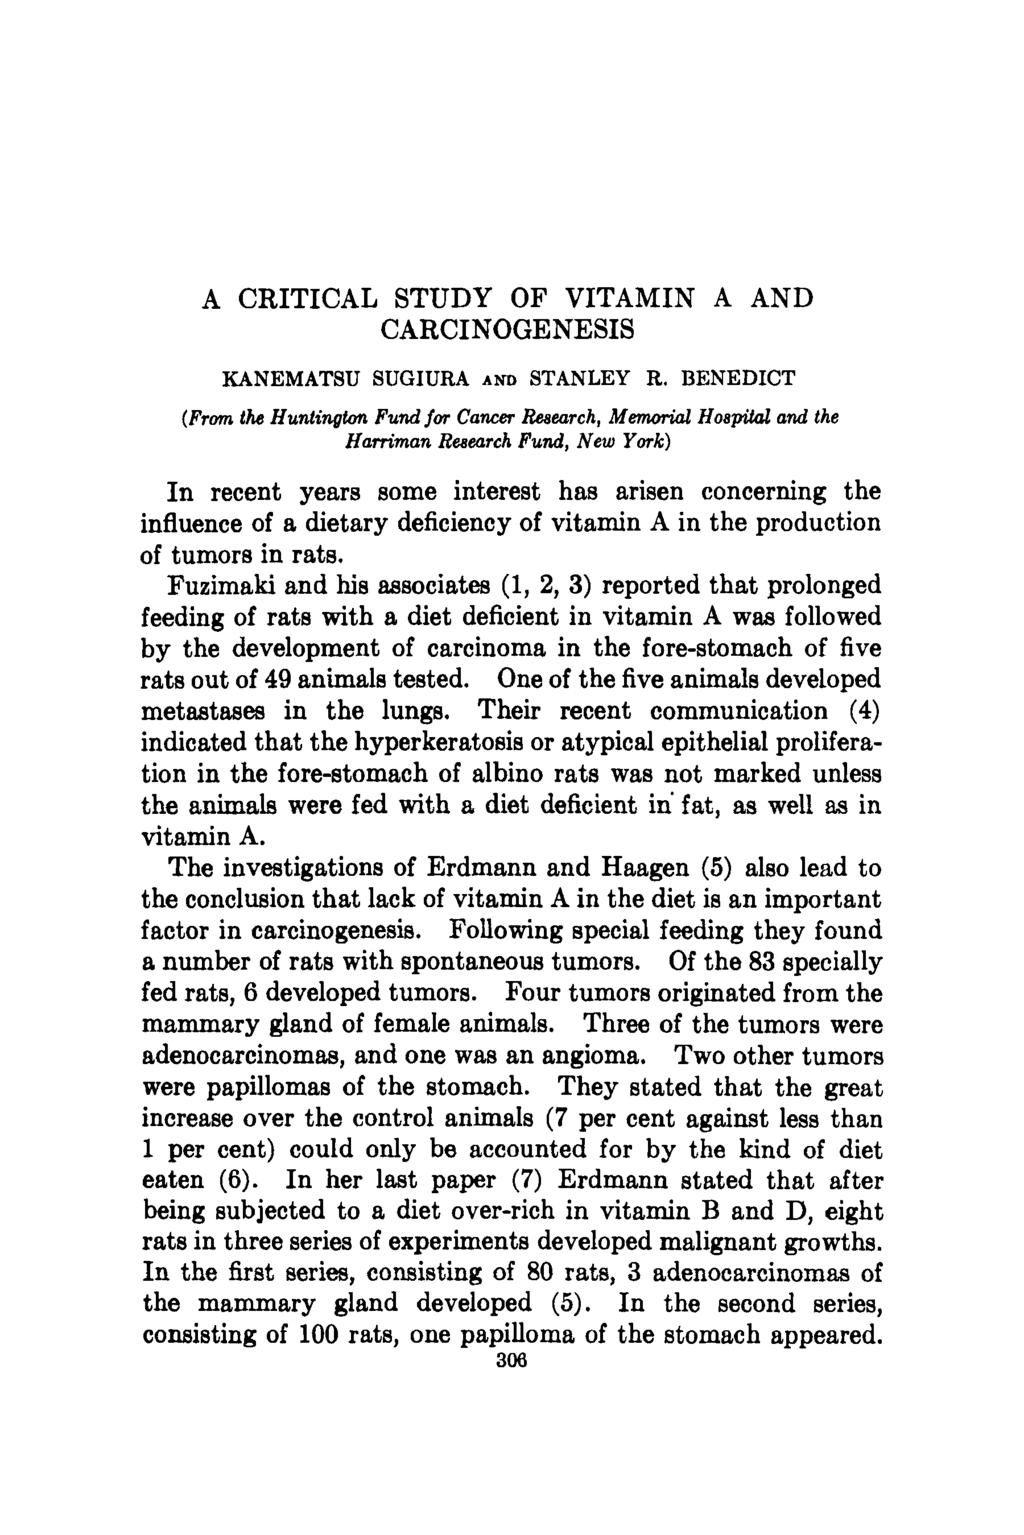 A CRITICAL STUDY OF VITAMIN A AND CARCINOGENESIS KANEMATSU SUGIURA AND STANLEY R.